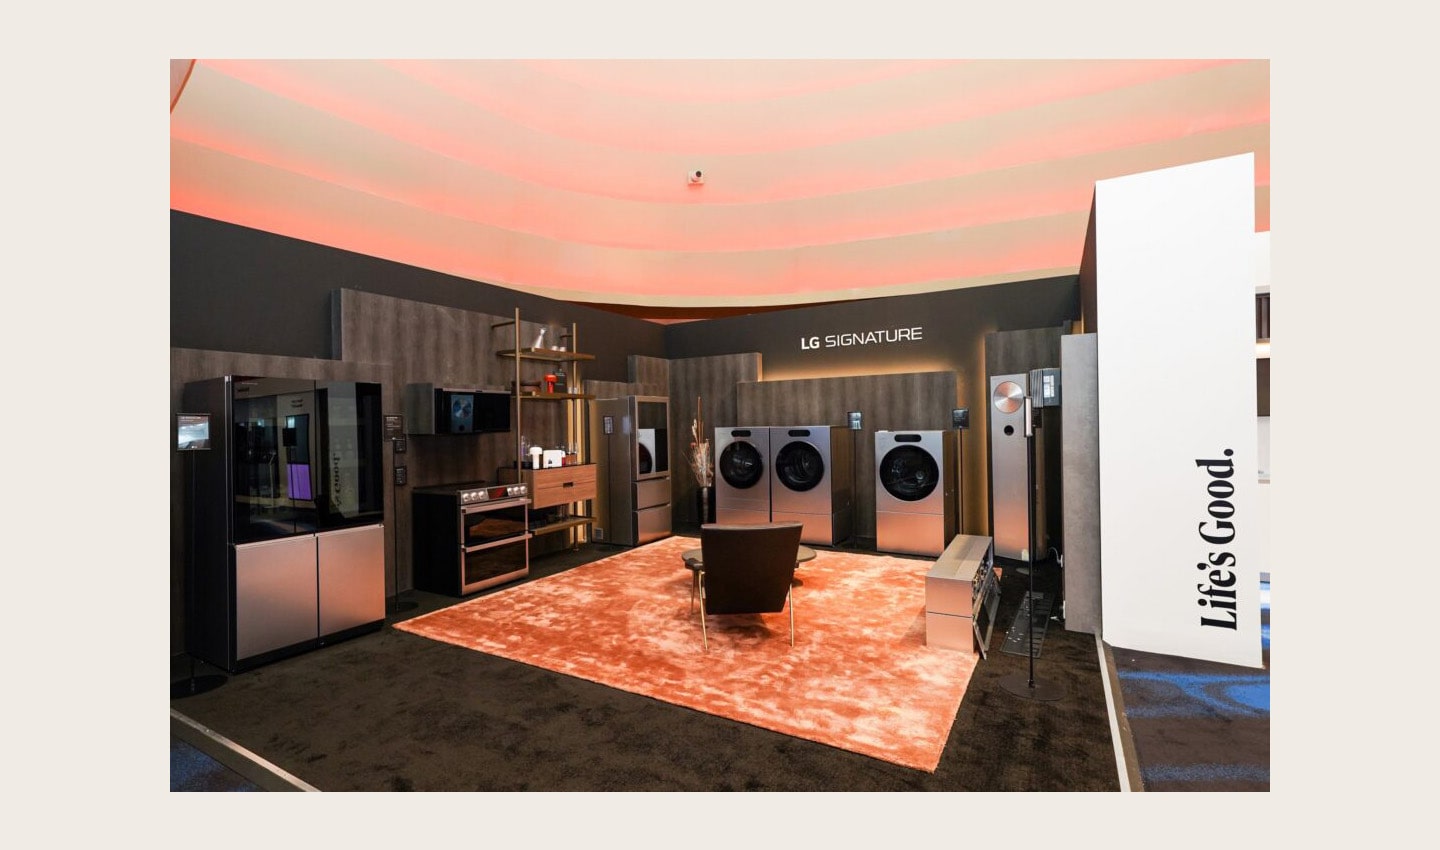 LG SIGNATURE appliances displayed at the renowned Middle East and Africa (MEA) tech event, LG Showcase 2023